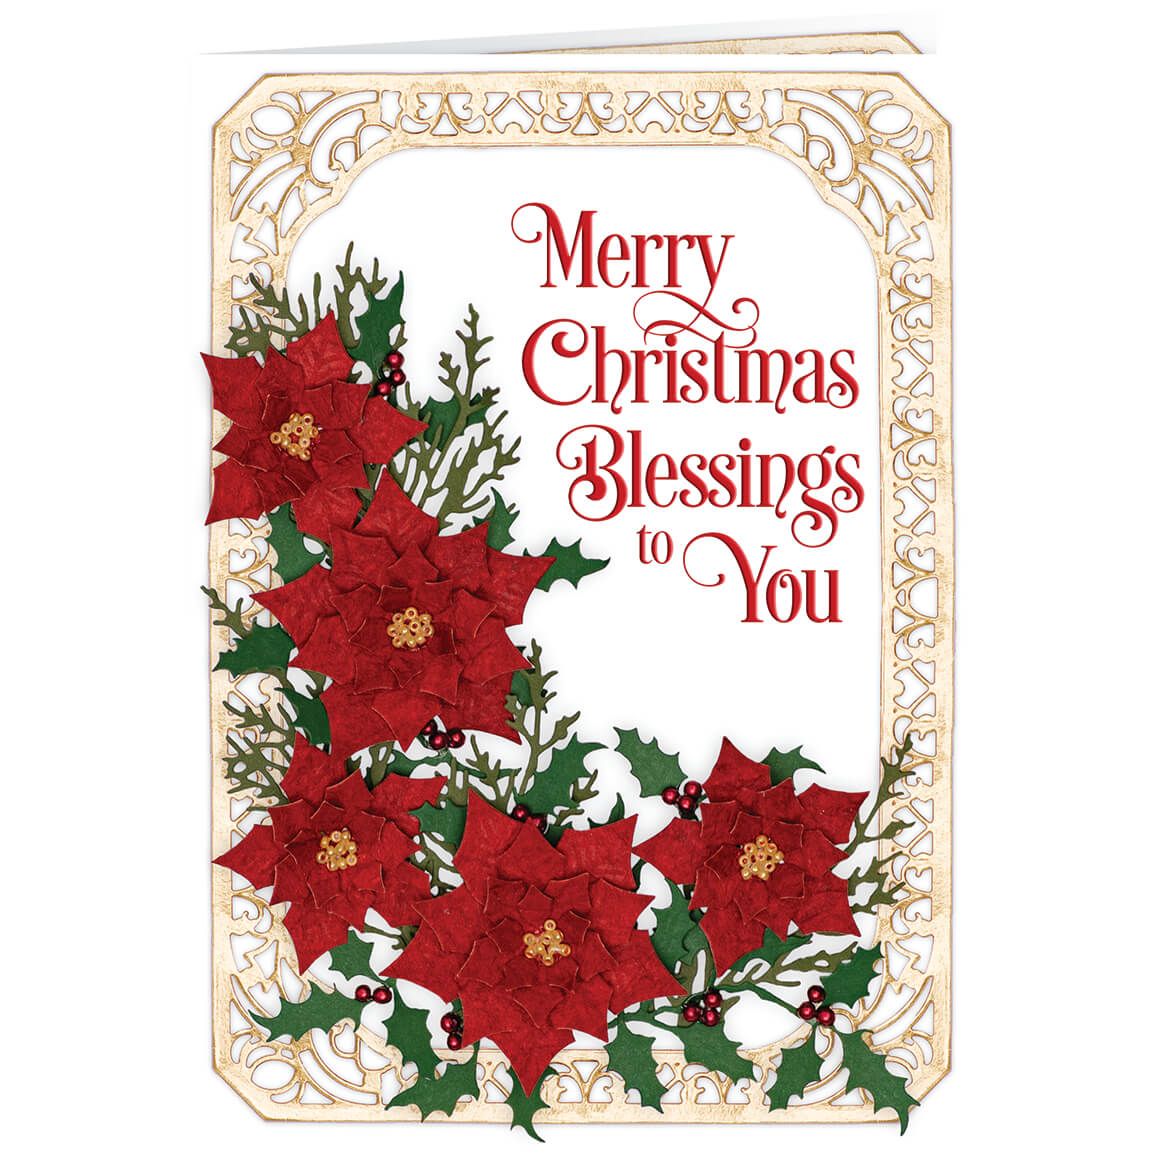 Poinsettia Collage Christmas Card Set of 20 + '-' + 370187